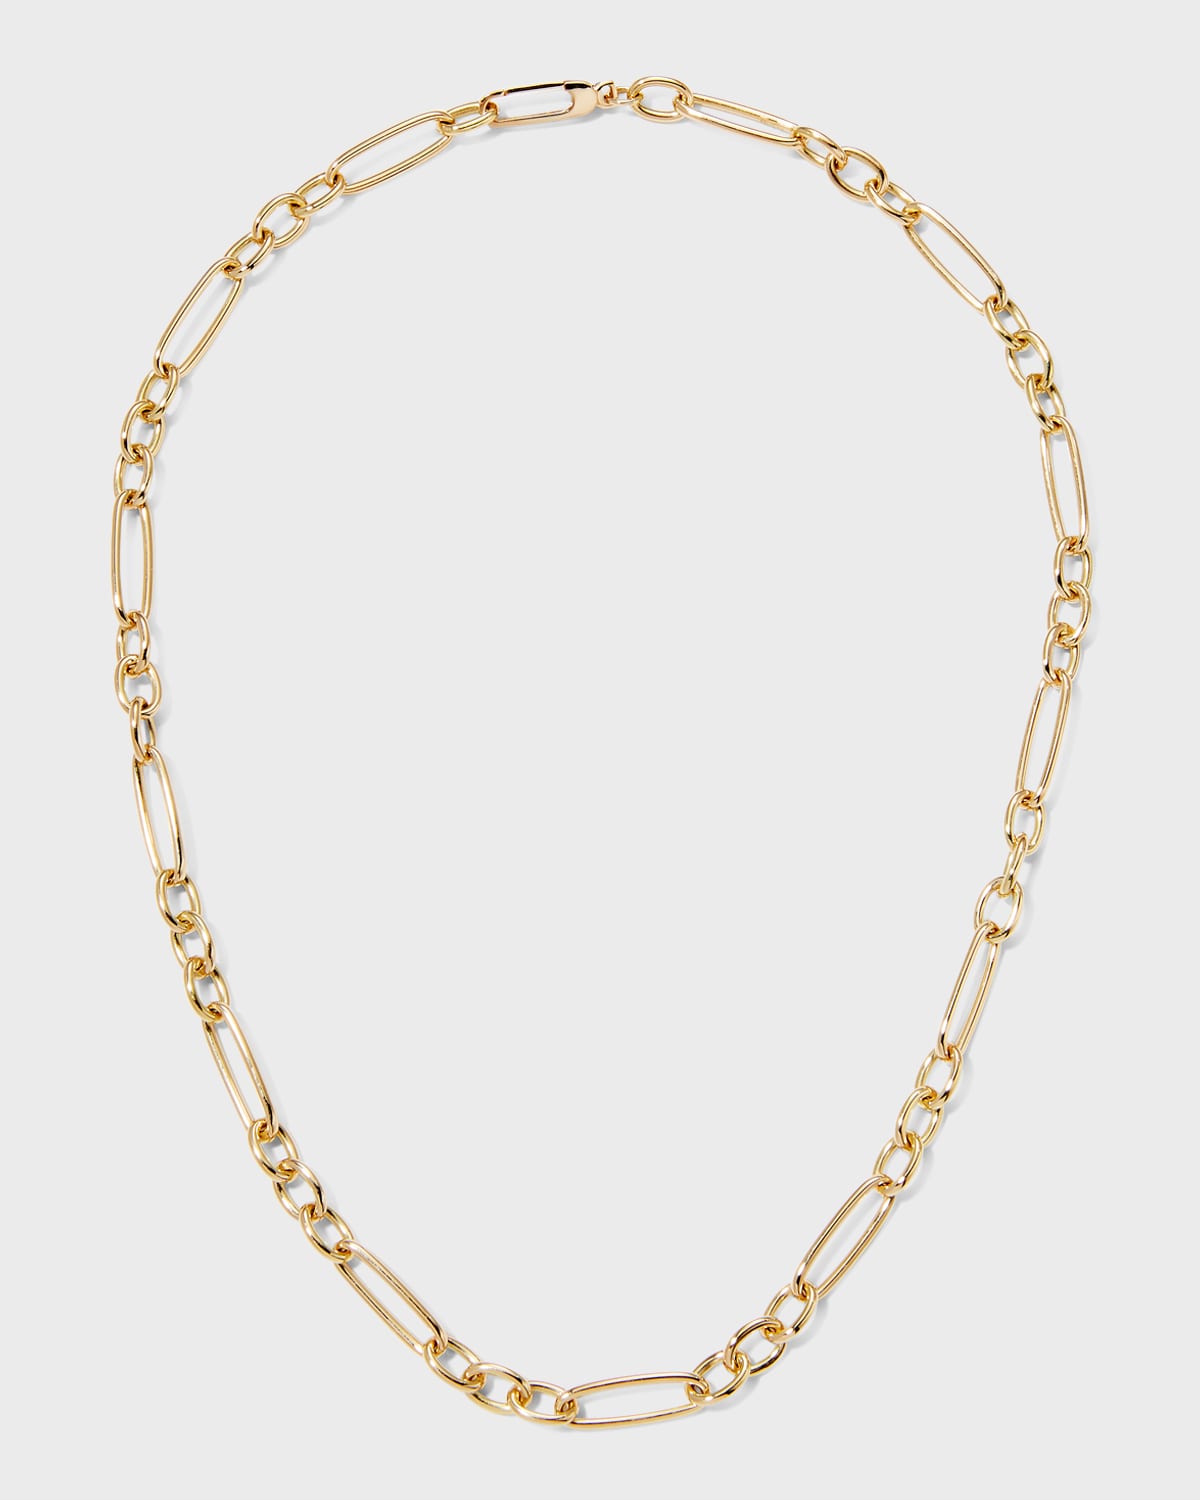 ROBERTO COIN YELLOW GOLD ALTERNATING LONG AND SHORT OVAL LINK CHAIN NECKLACE, 18"L